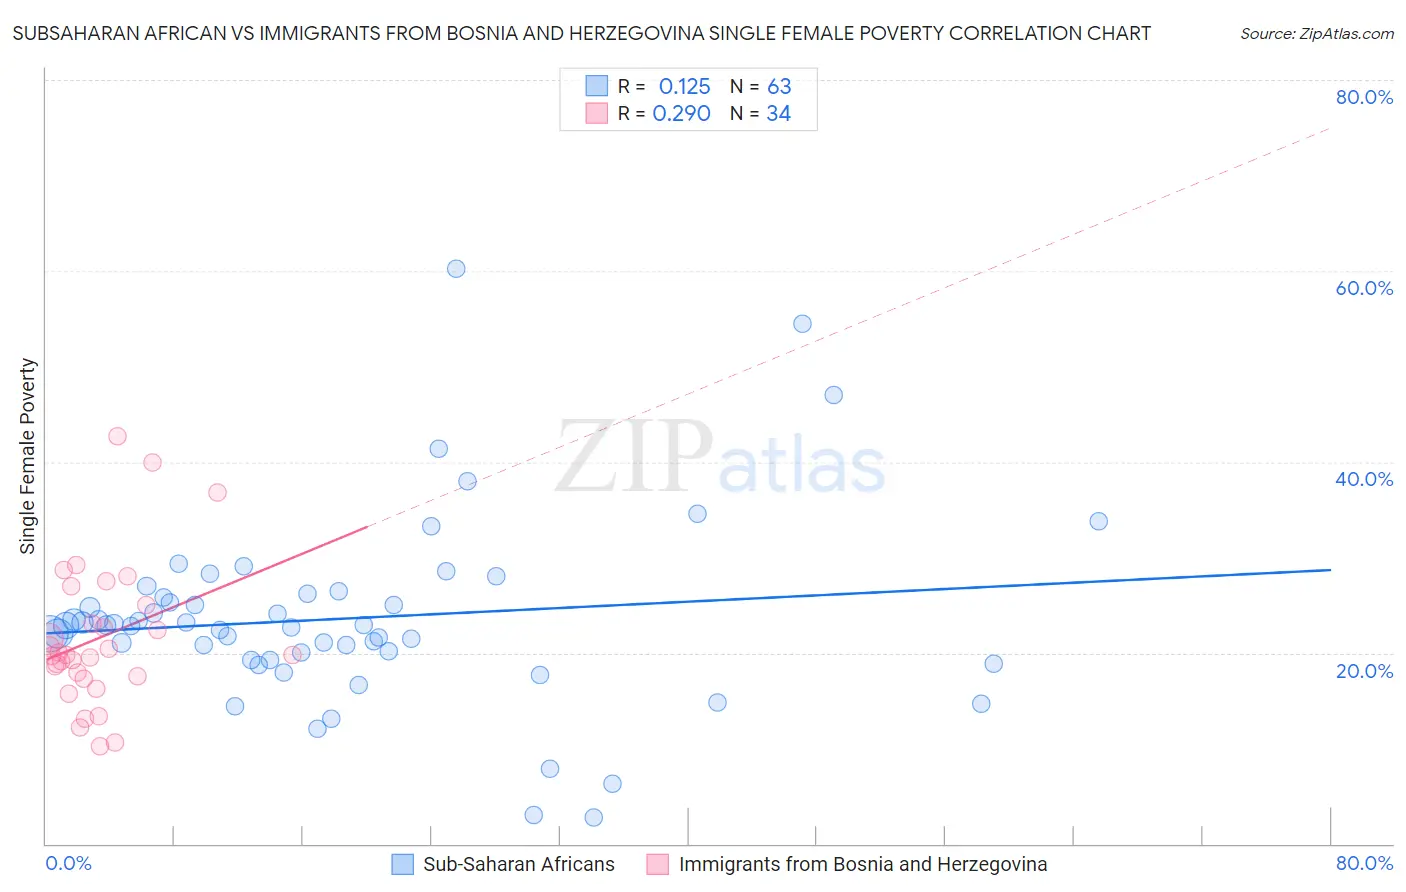 Subsaharan African vs Immigrants from Bosnia and Herzegovina Single Female Poverty